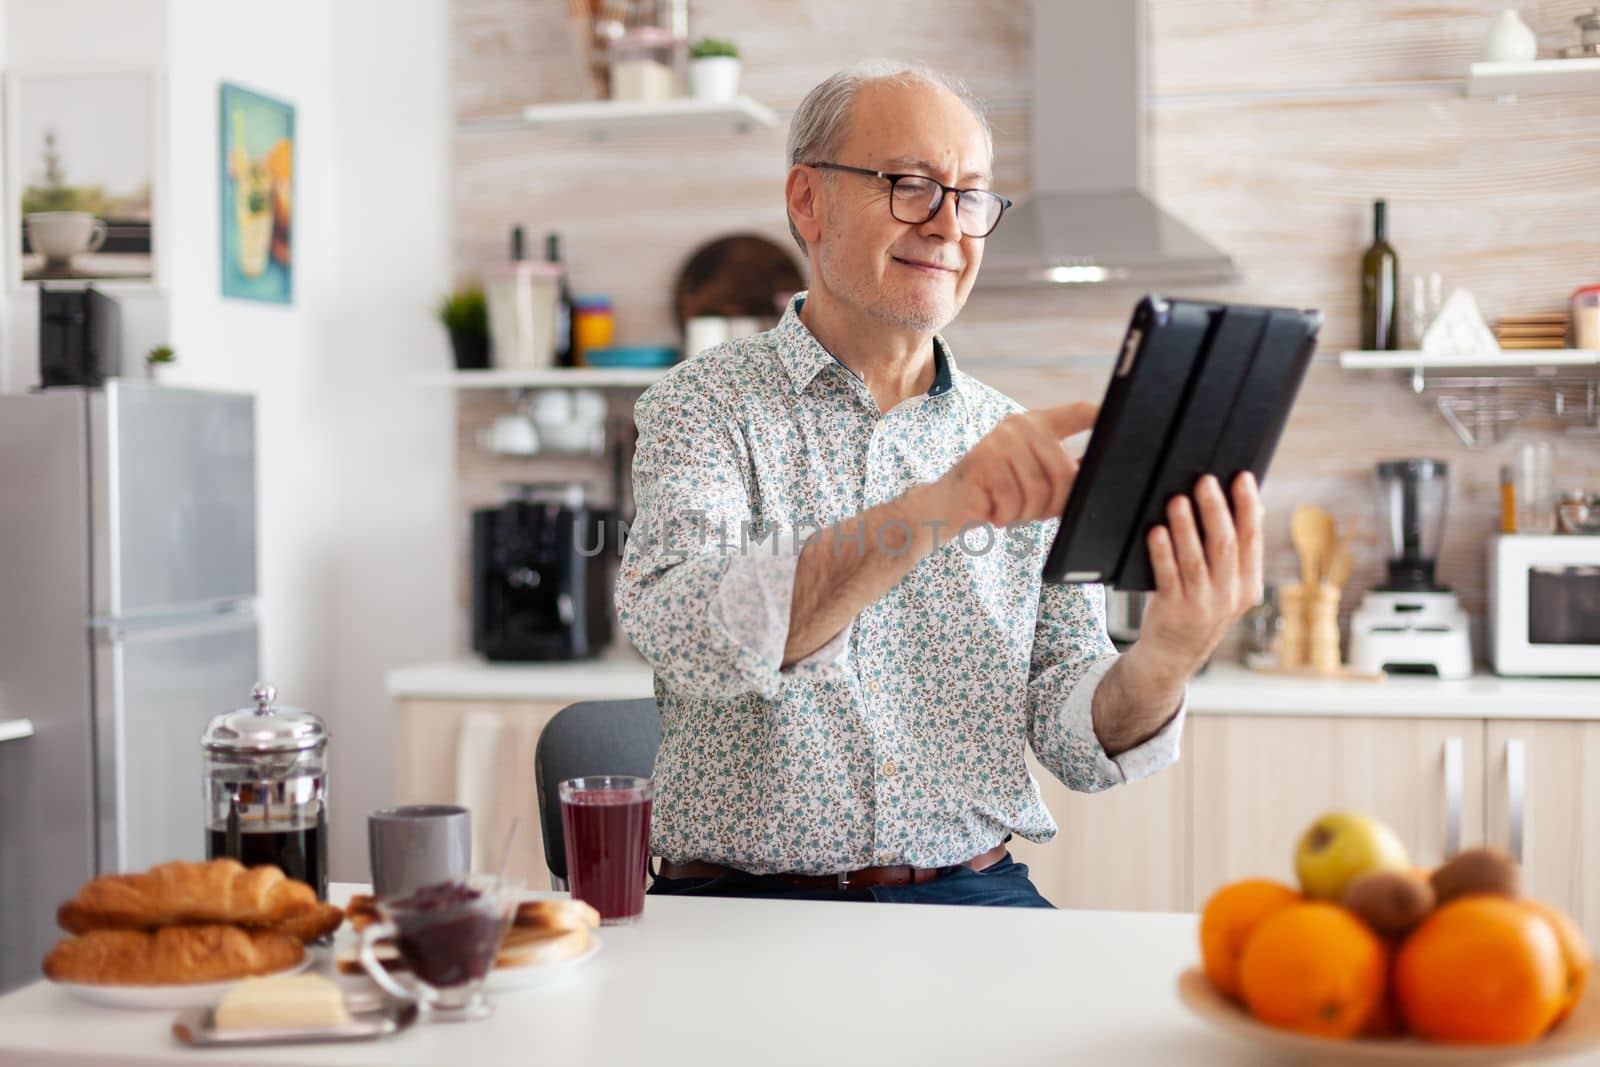 Happy senior man searching on tablet in kitchen during breakfast enjoying loisire time. Elderly retired person working from home, telecommuting using remote internet job online communication.